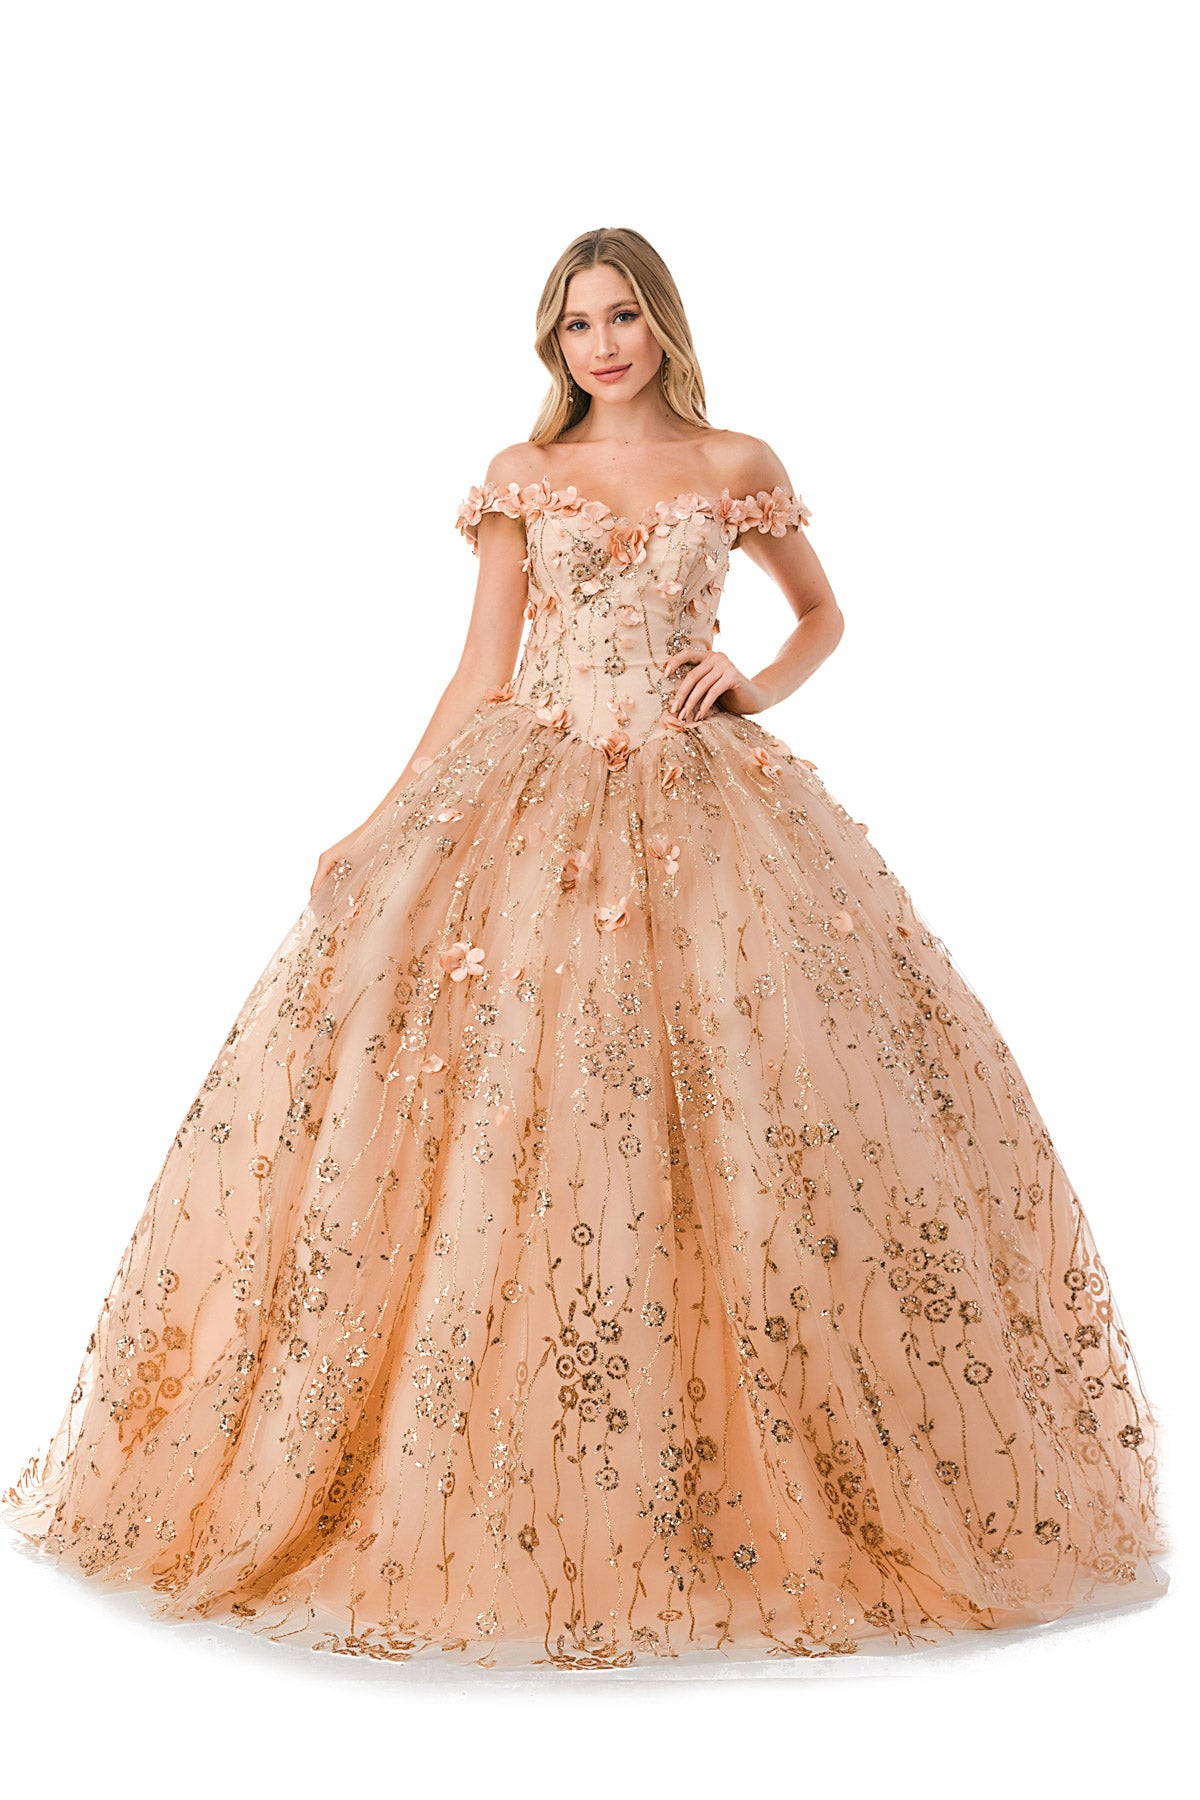 Aspeed L2766A Gorgeous Rose Gold Floral Inspired Ball Gown - NORMA REED